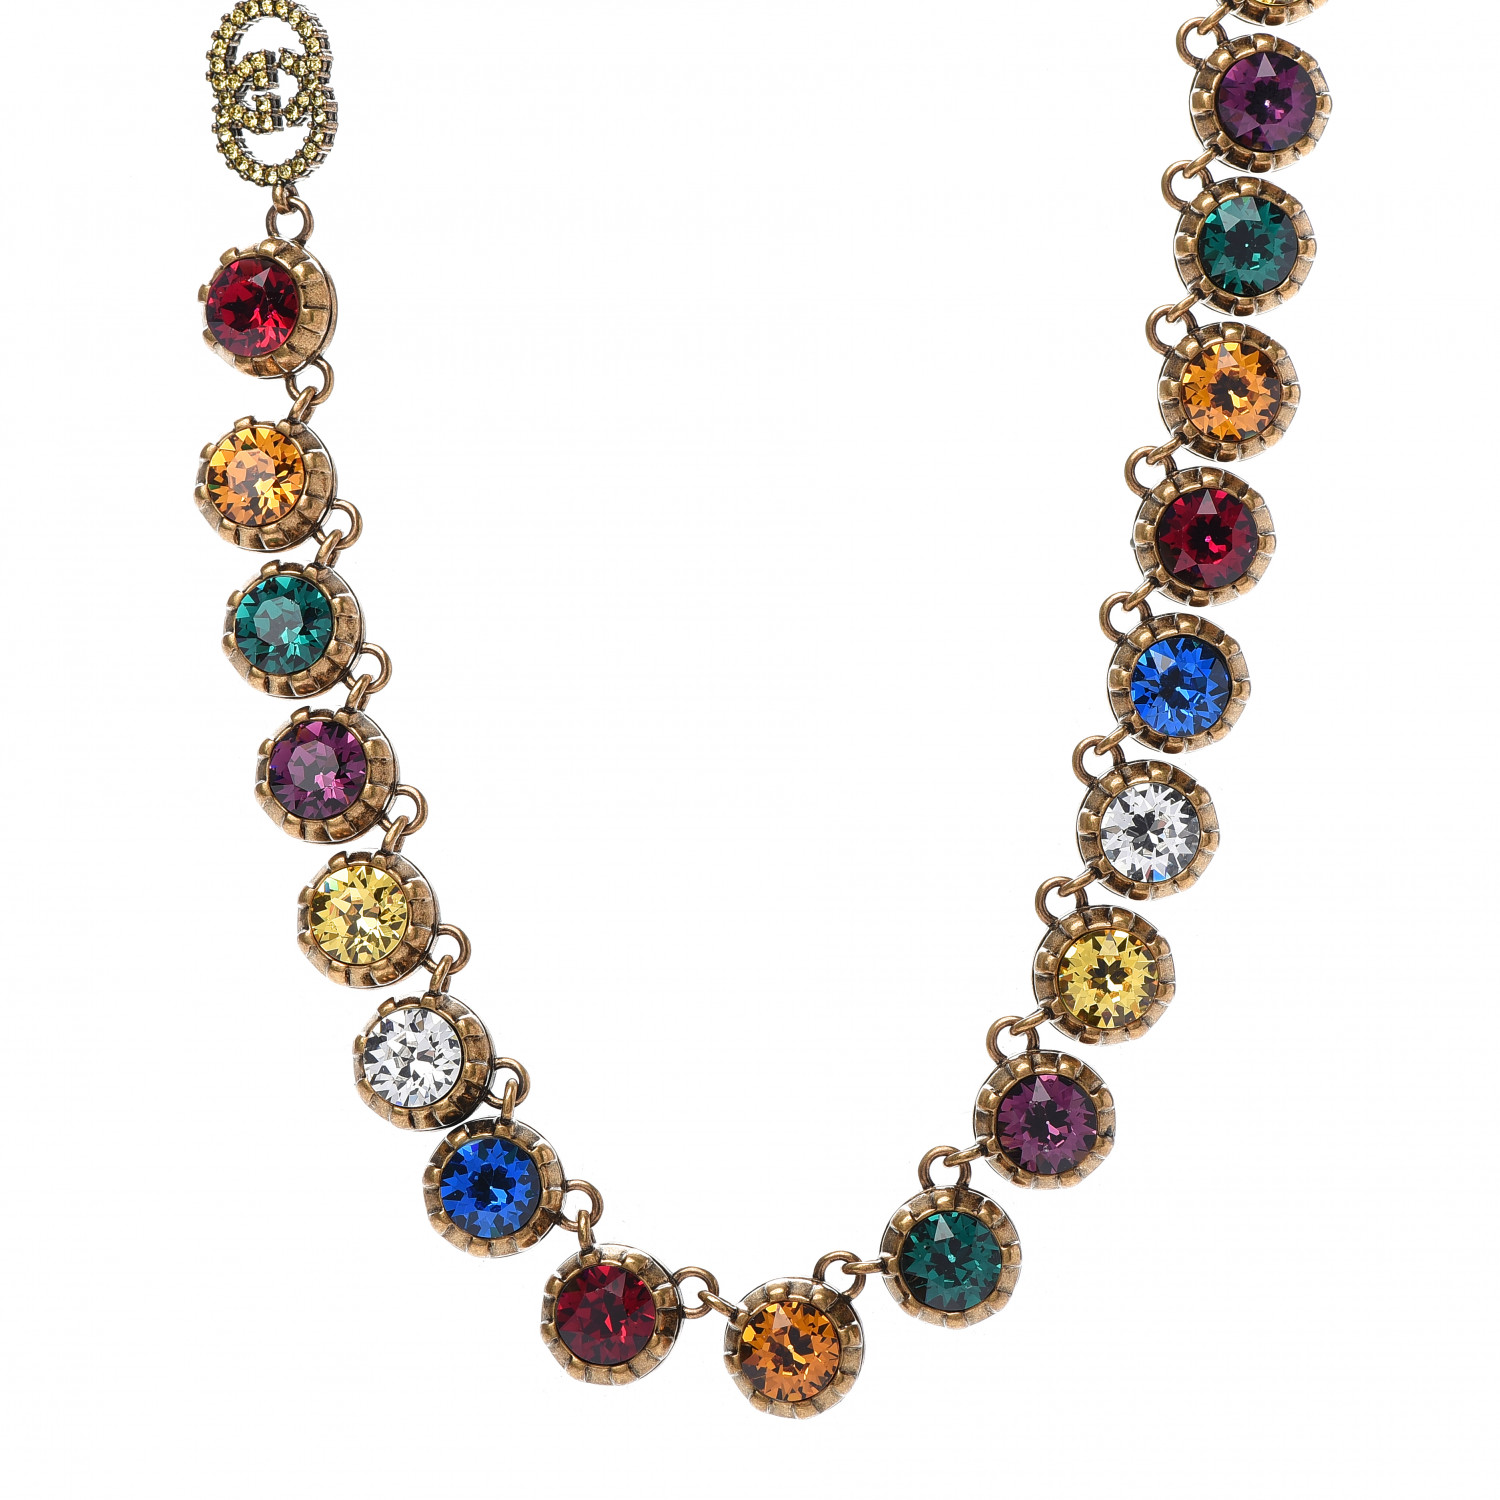 GUCCI Crystal Butterfly Necklace Aged Gold Multicolor 711037 | FASHIONPHILE